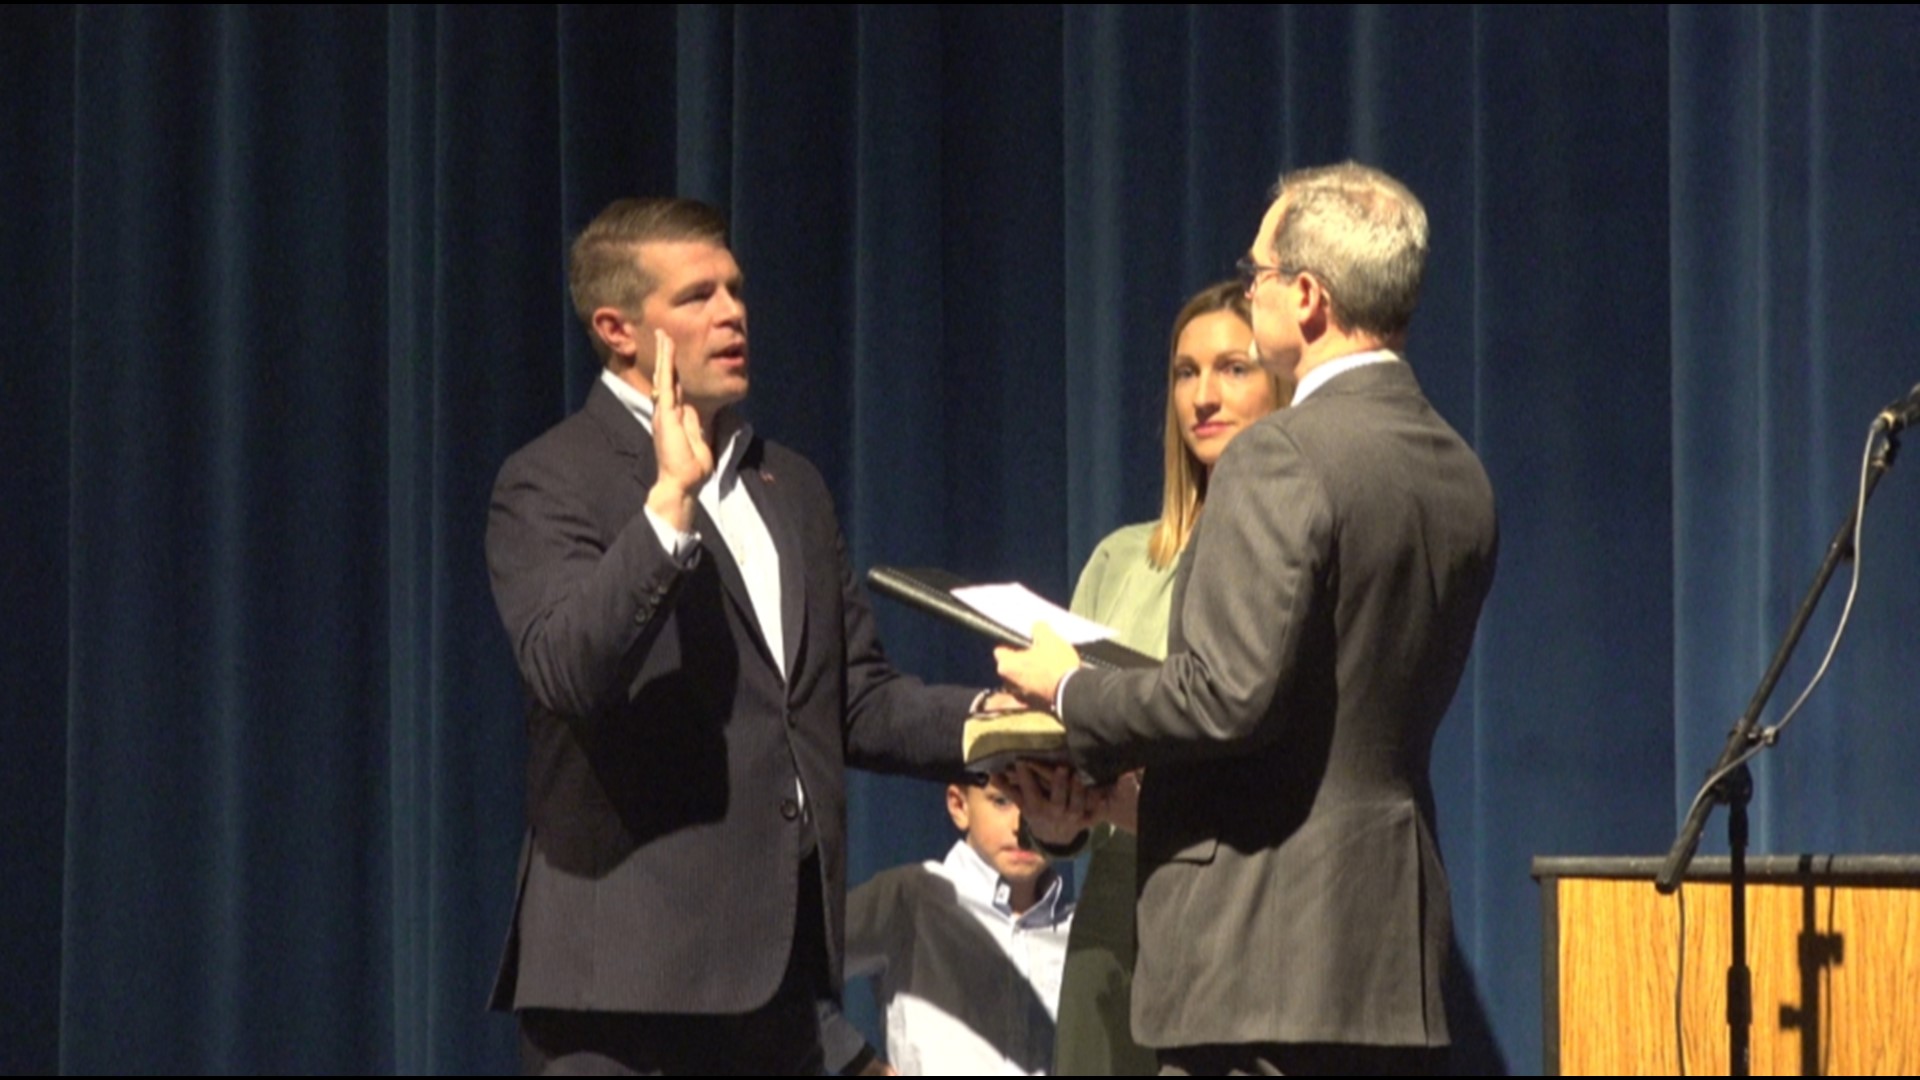 The Midland man was sworn in by State Senator Kevin Sparks at Greenwood High School.